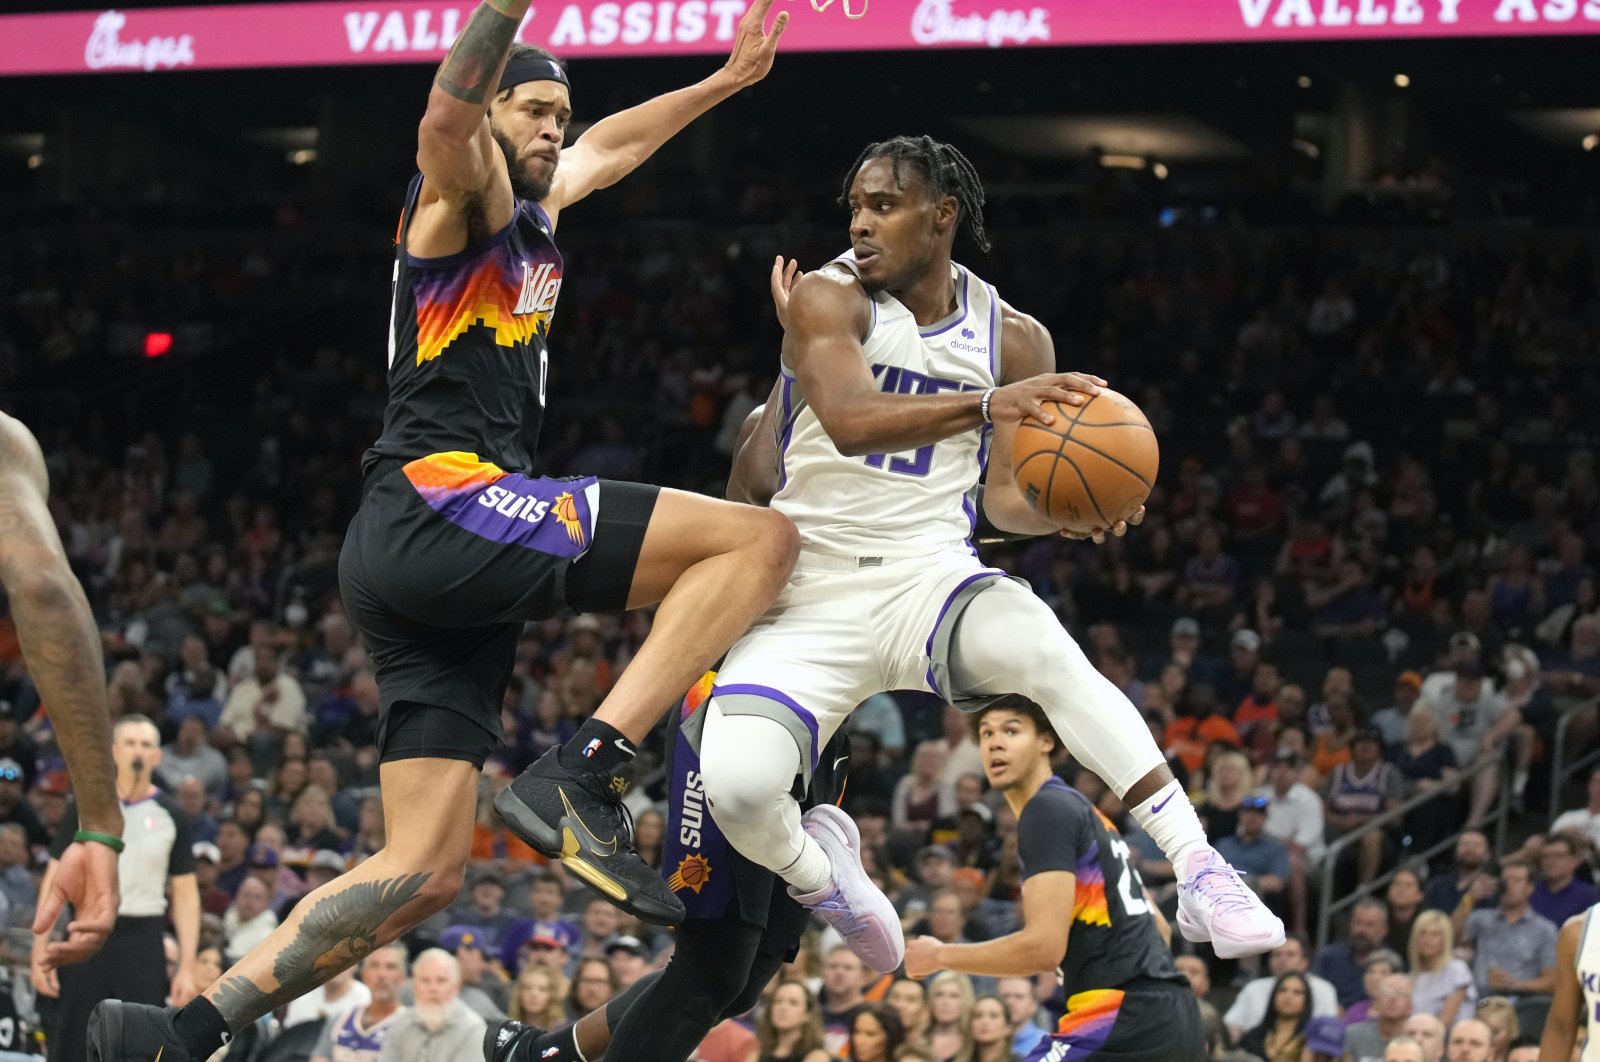 Kings guard Davion Mitchell (R) drives on Suns center JaVale McGee in an NBA game, Phoenix, U.S., April 10, 2022. (AP Photo)